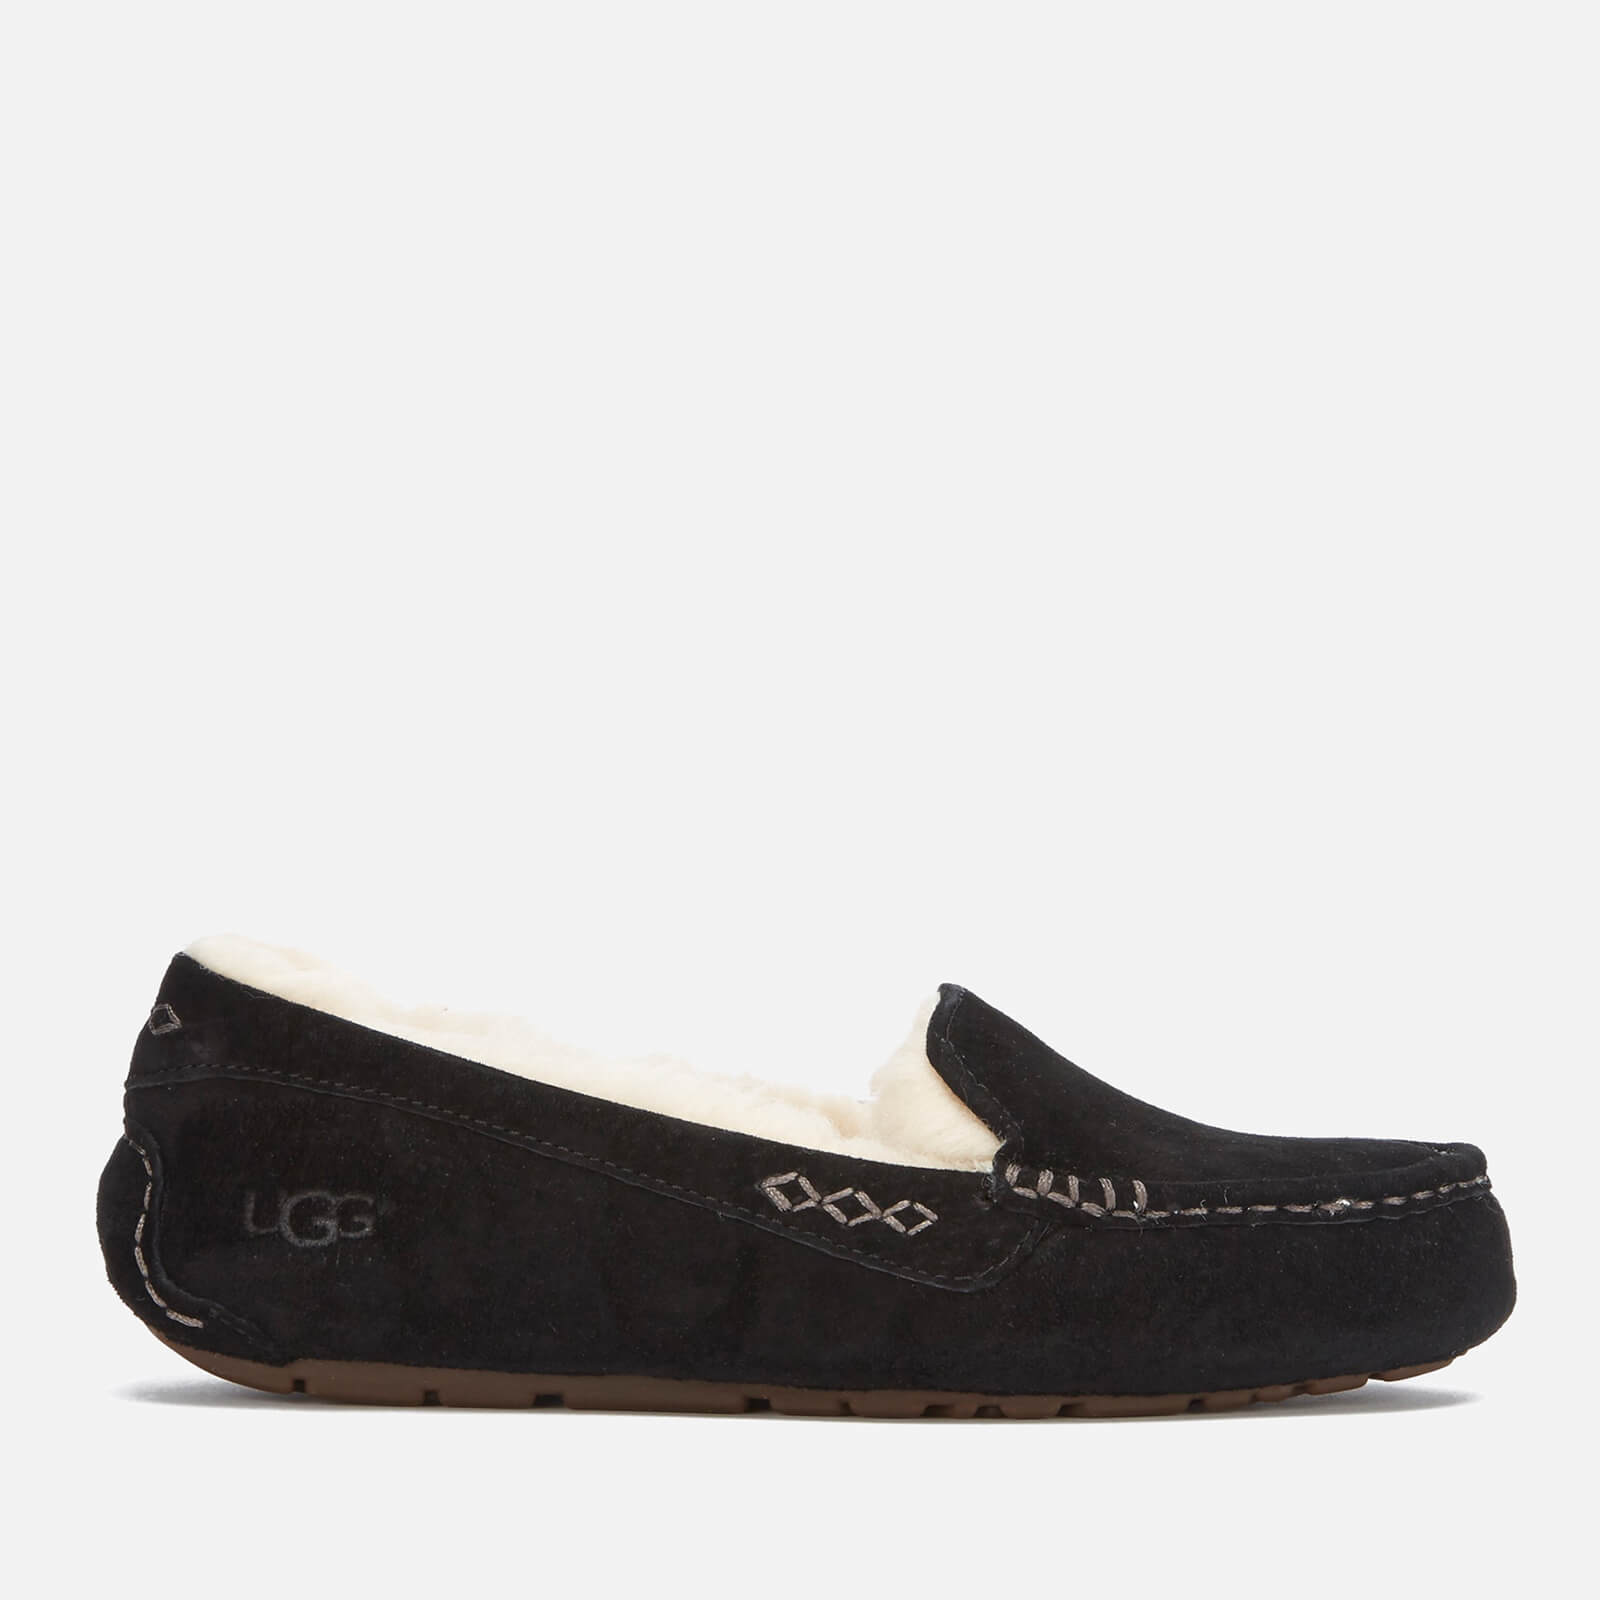 Ansley Moccasin Suede Slippers - Black 